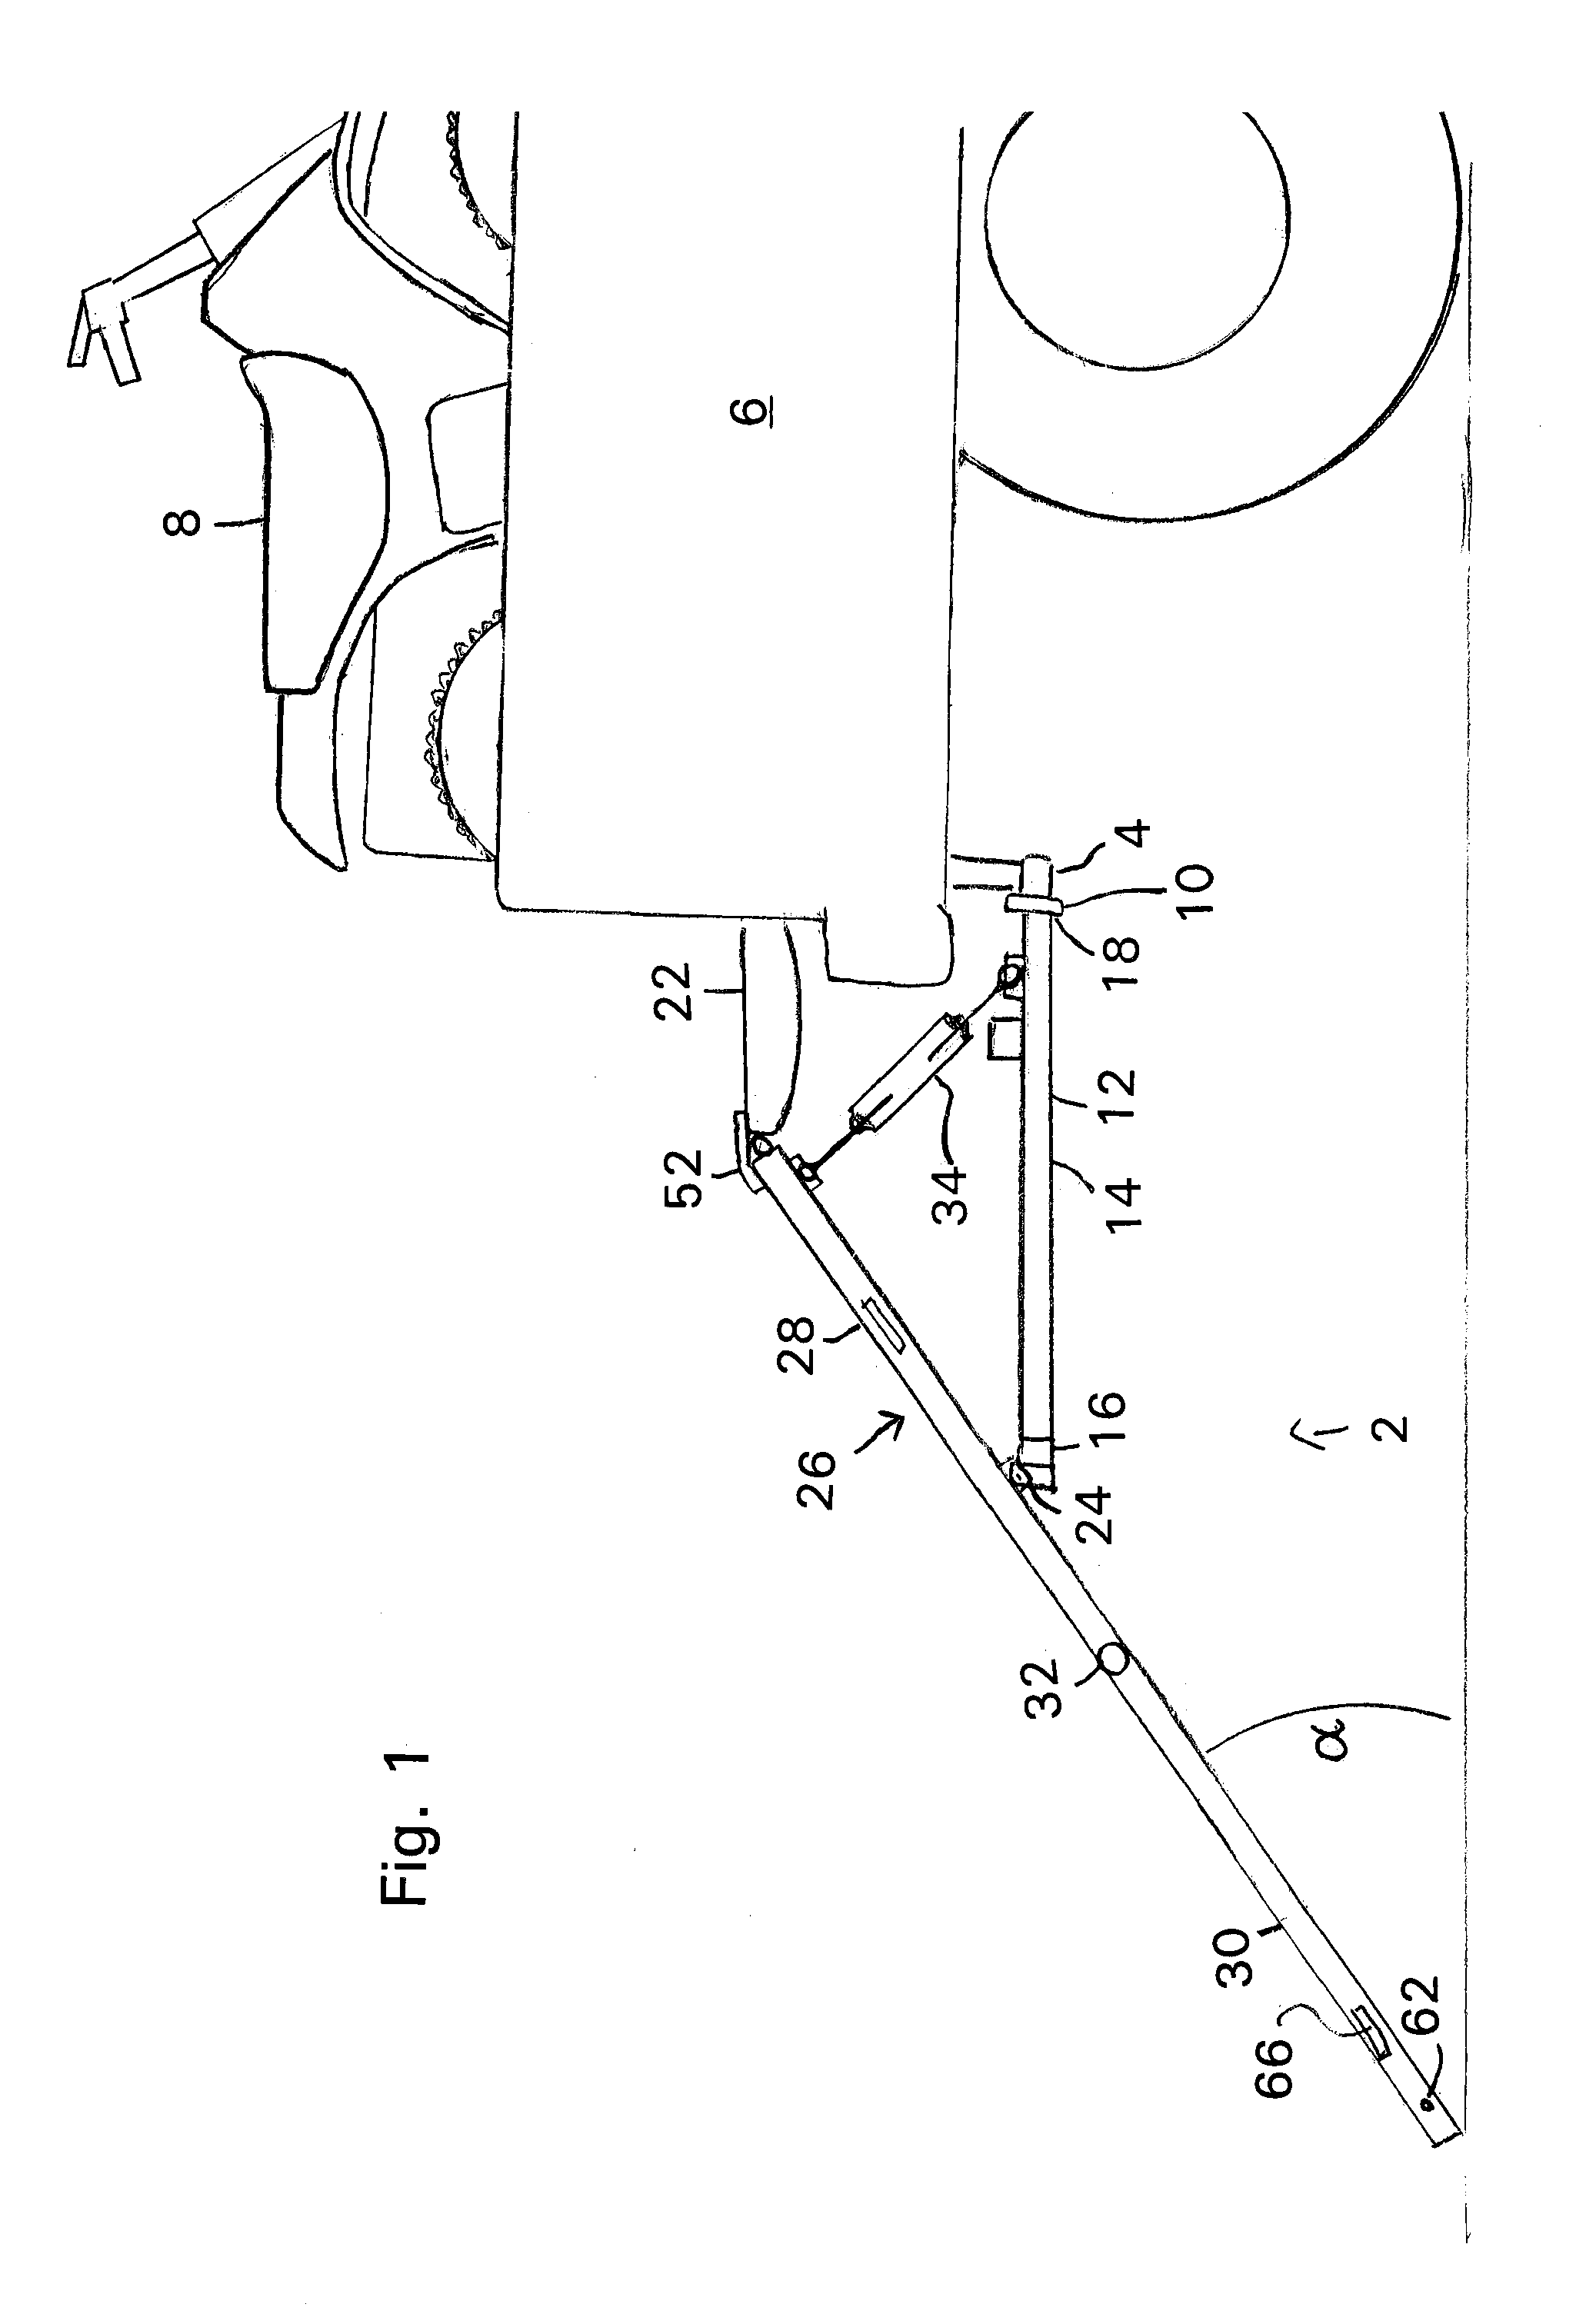 Off-road vehicle loading/unloading device supported by trailer hitch